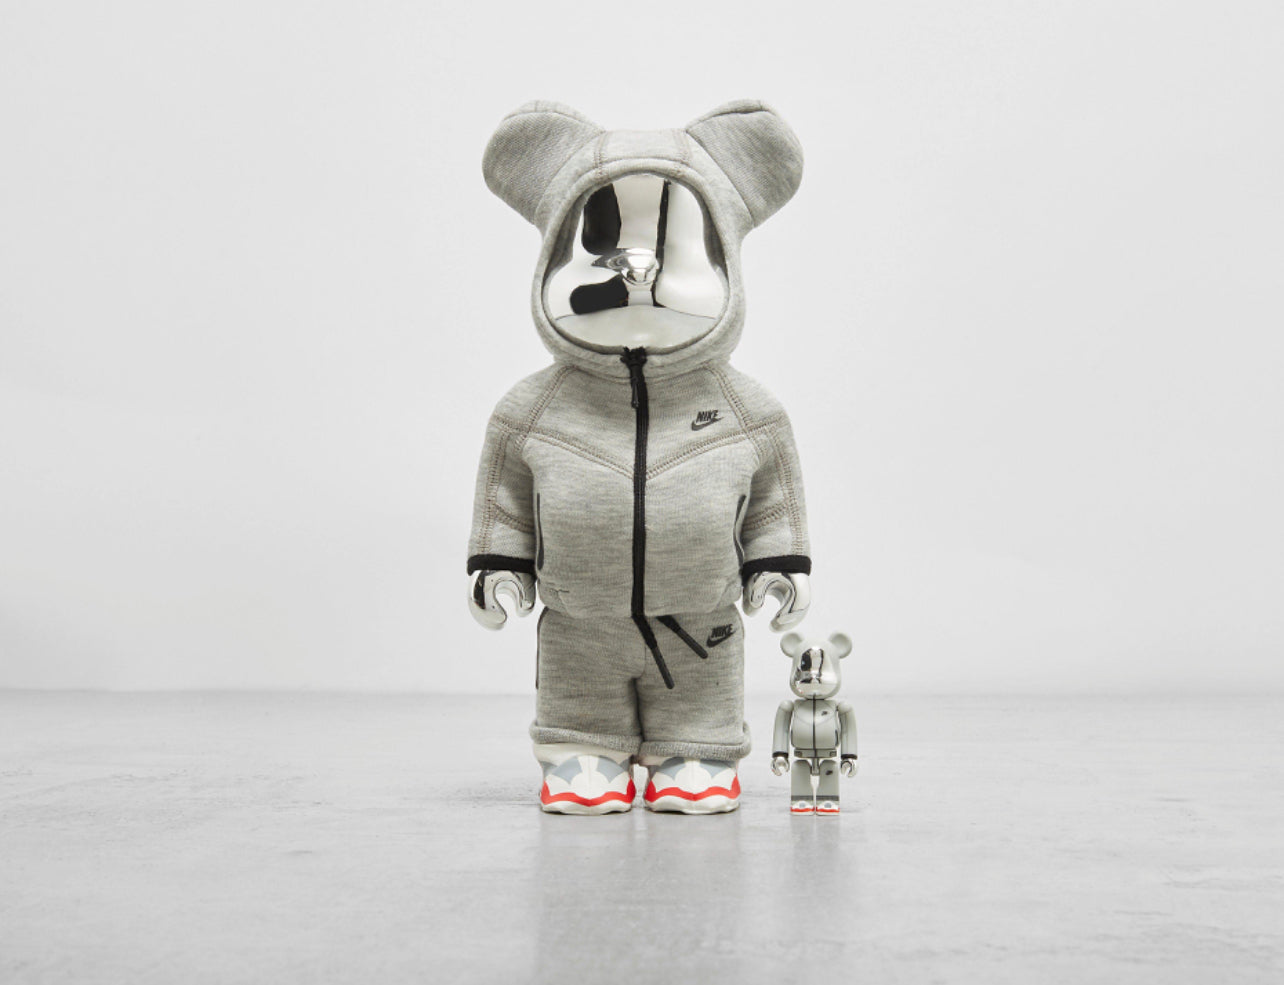 Load video: These iconic figures, known for their minimalist design and endless possibilities, have been gracing shelves and collections worldwide. From beloved characters to famous artists, Bearbricks take inspiration from all corners of creativity.